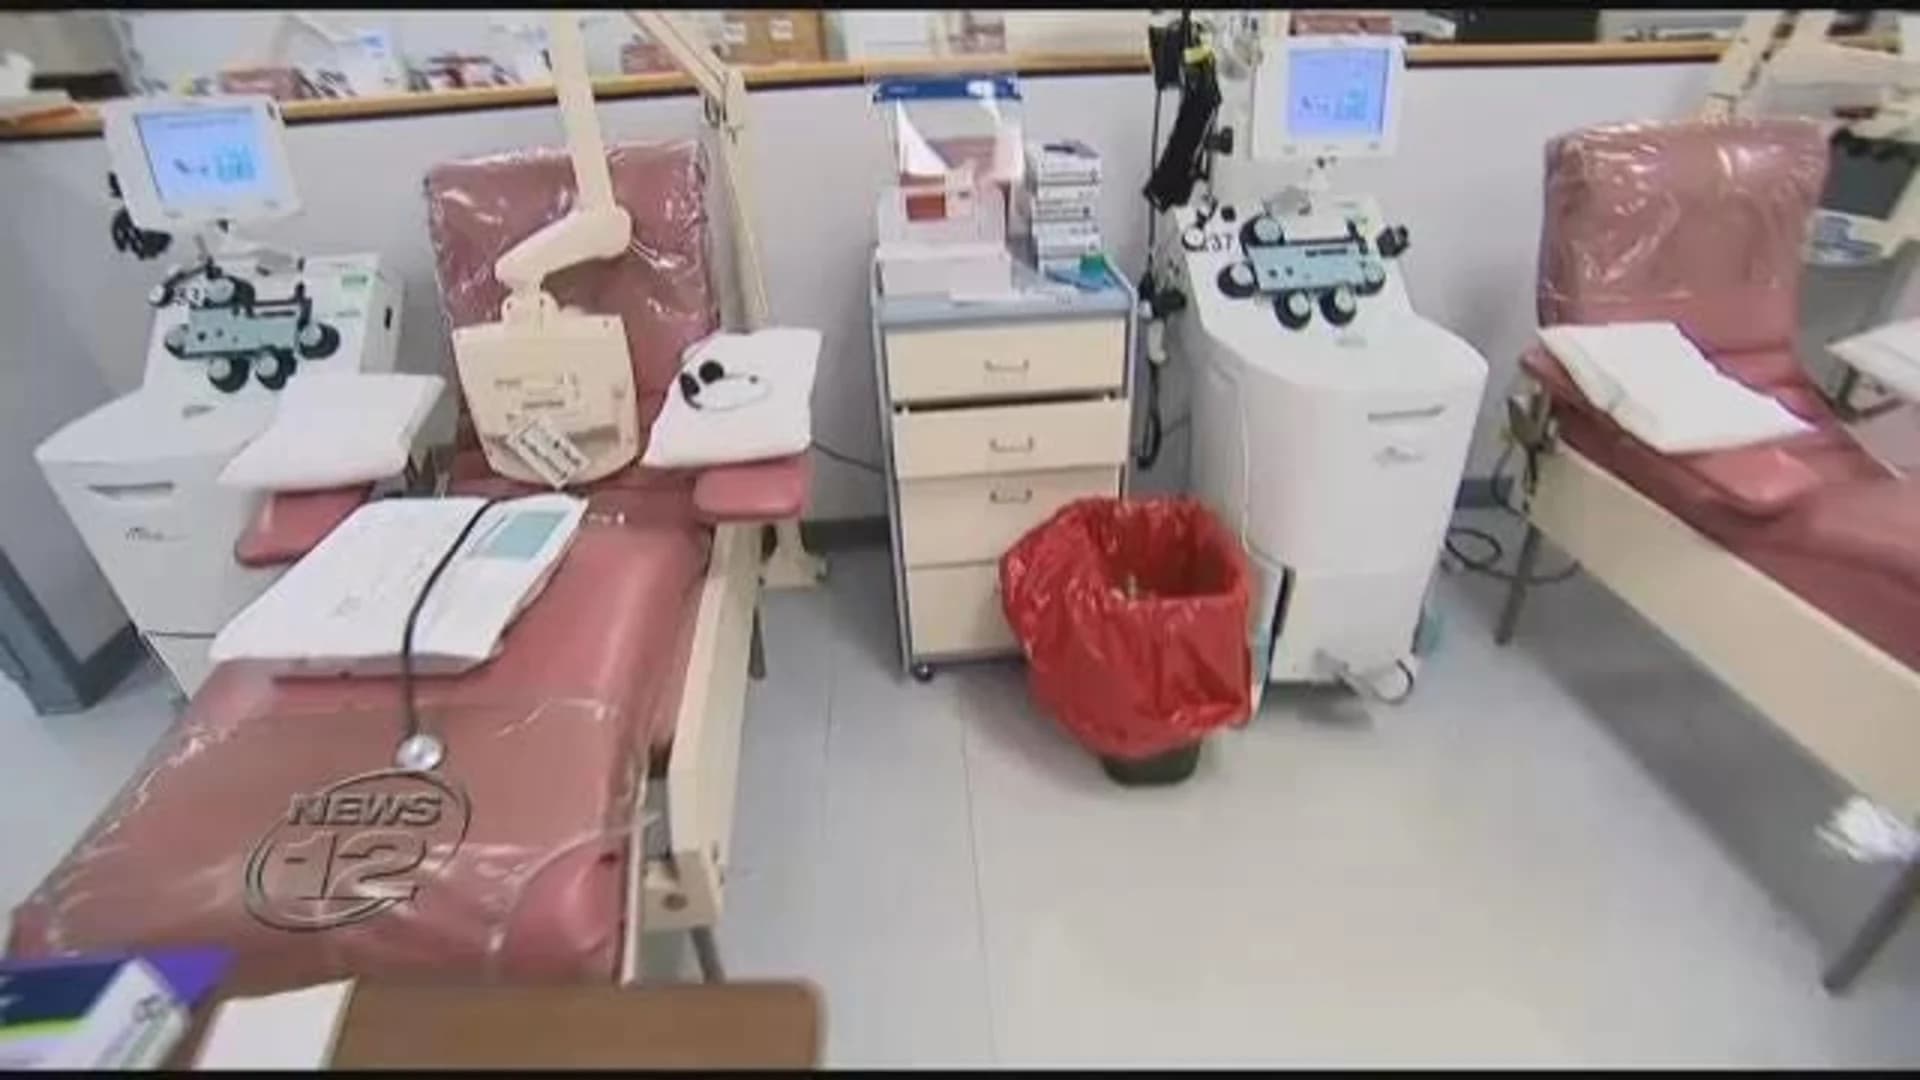 Donors needed: NY Blood Center urges people to roll up sleeves, help save lives